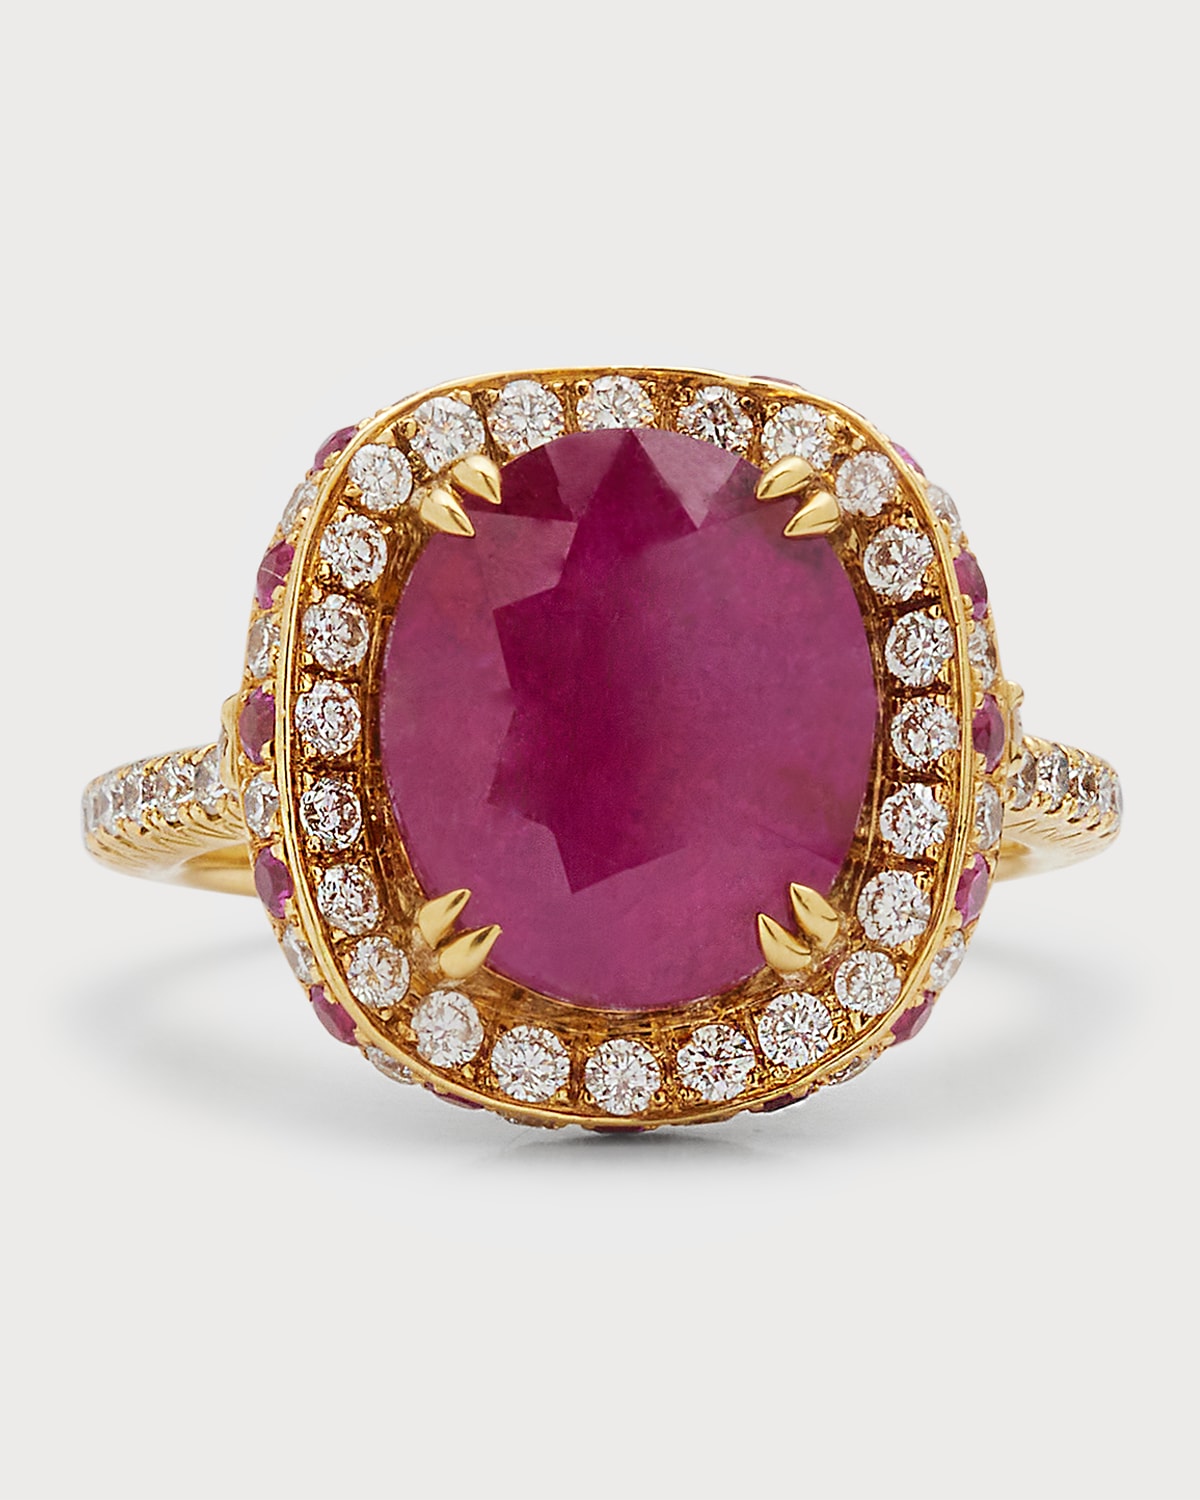 Alexander Laut 18K Ruby and Diamond Ring, Size 6.5